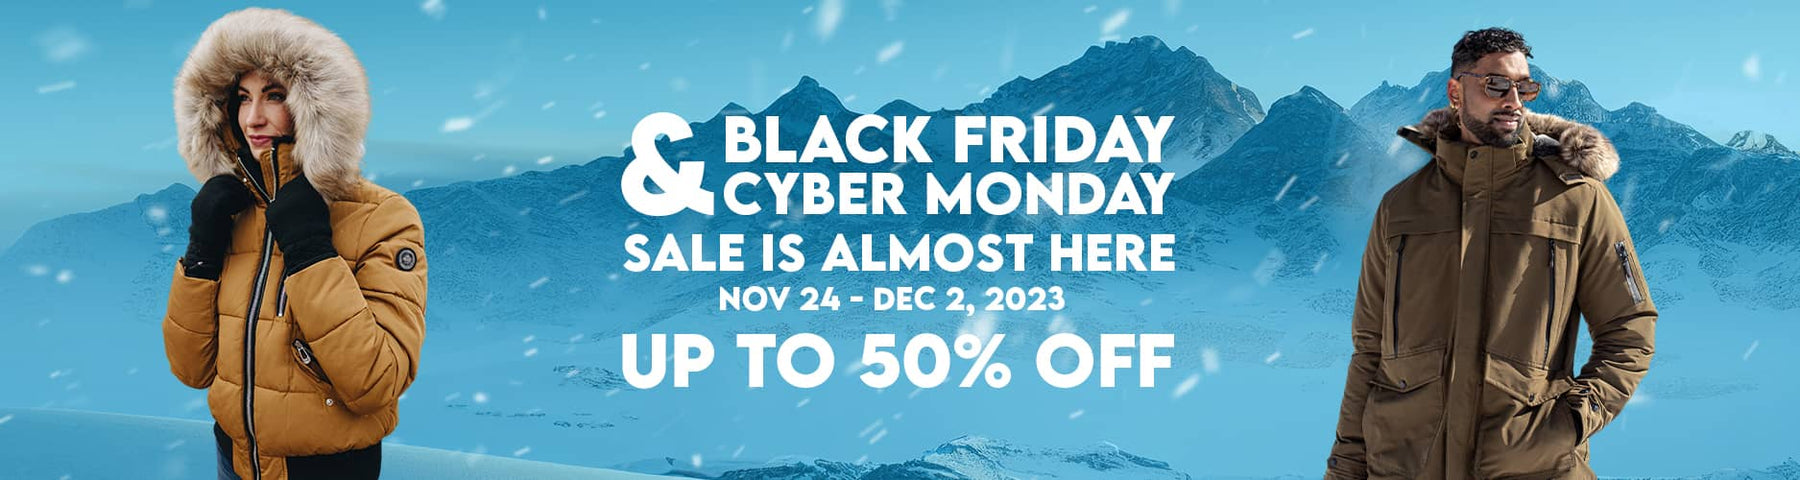 OUR BIGGEST EVER SALE IS HERE. BLACK FRIDAY & CYBER MONDAY SALE IS ALMOST LIVE…